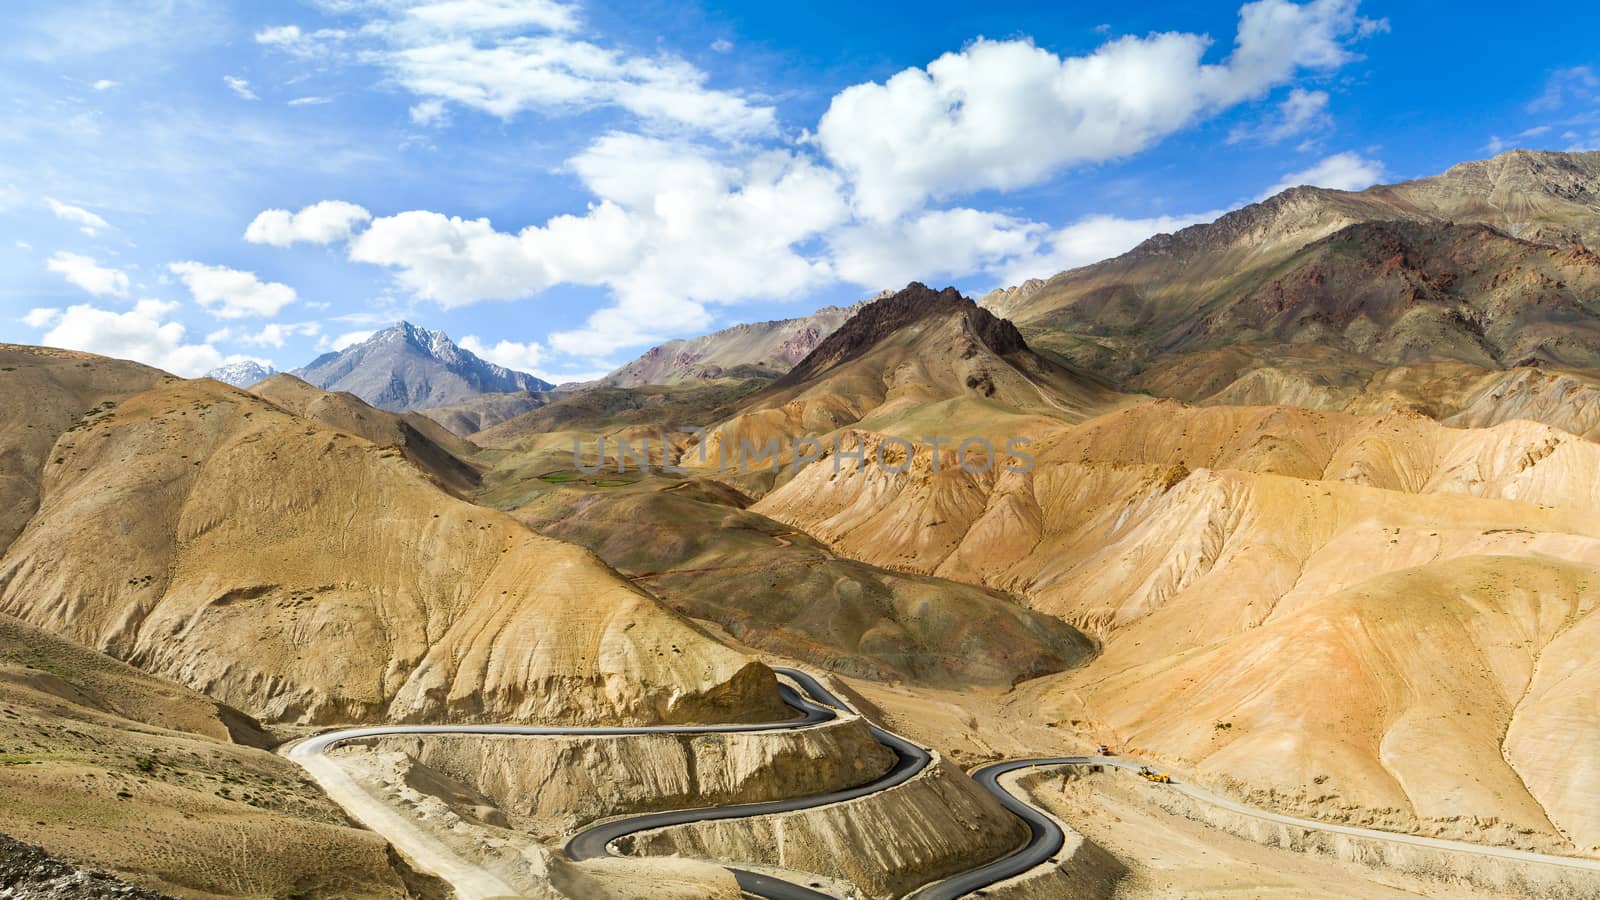 The new winding road in the Himalayas mountains by straannick